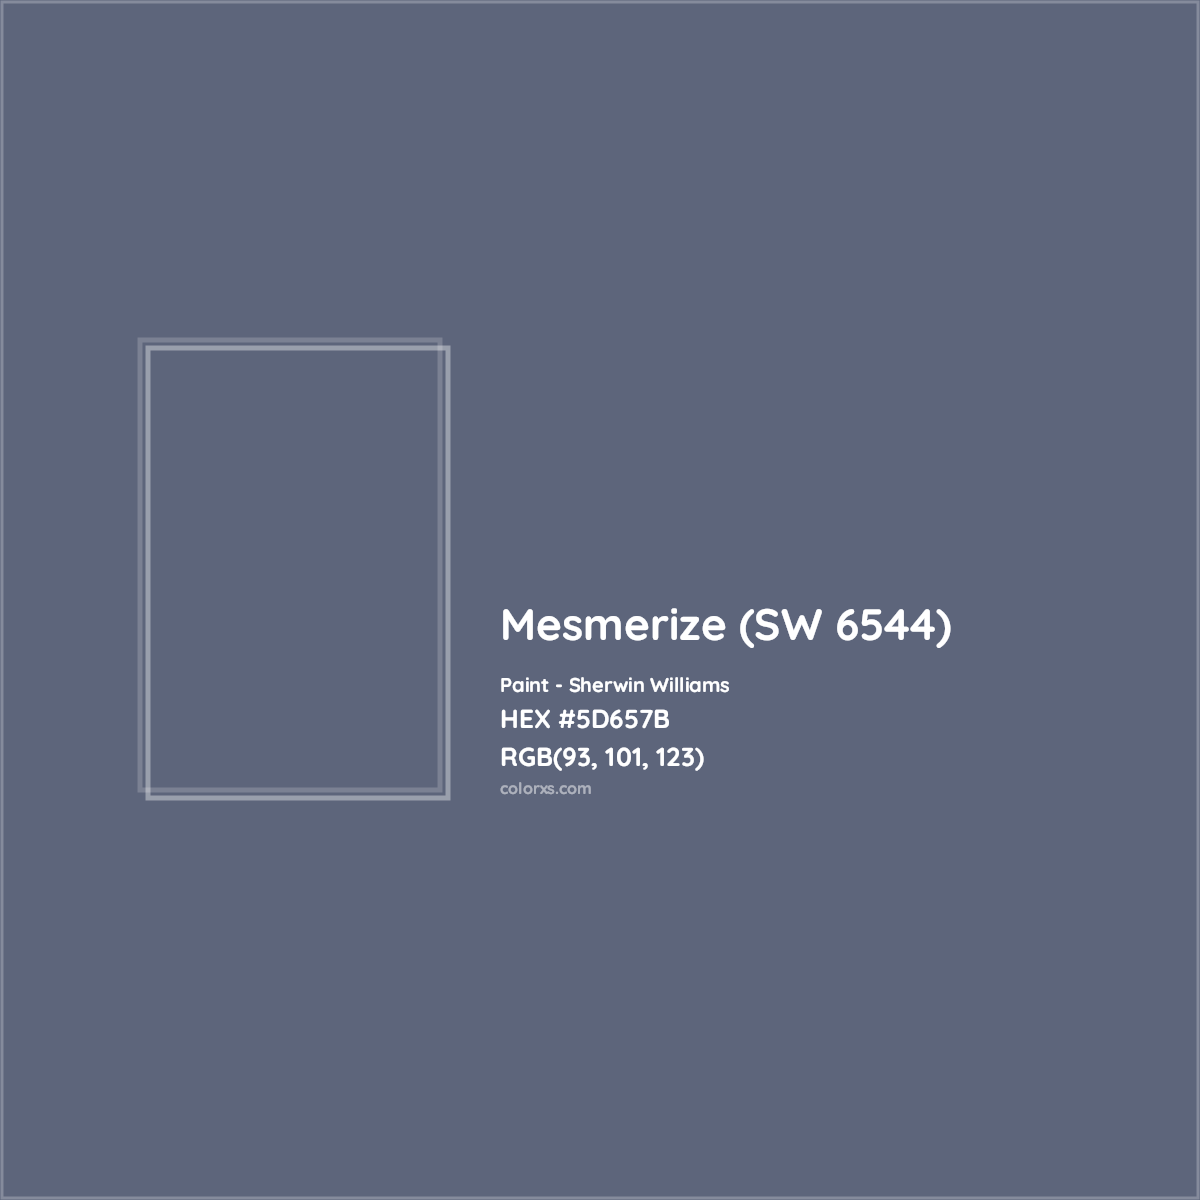 HEX #5D657B Mesmerize (SW 6544) Paint Sherwin Williams - Color Code